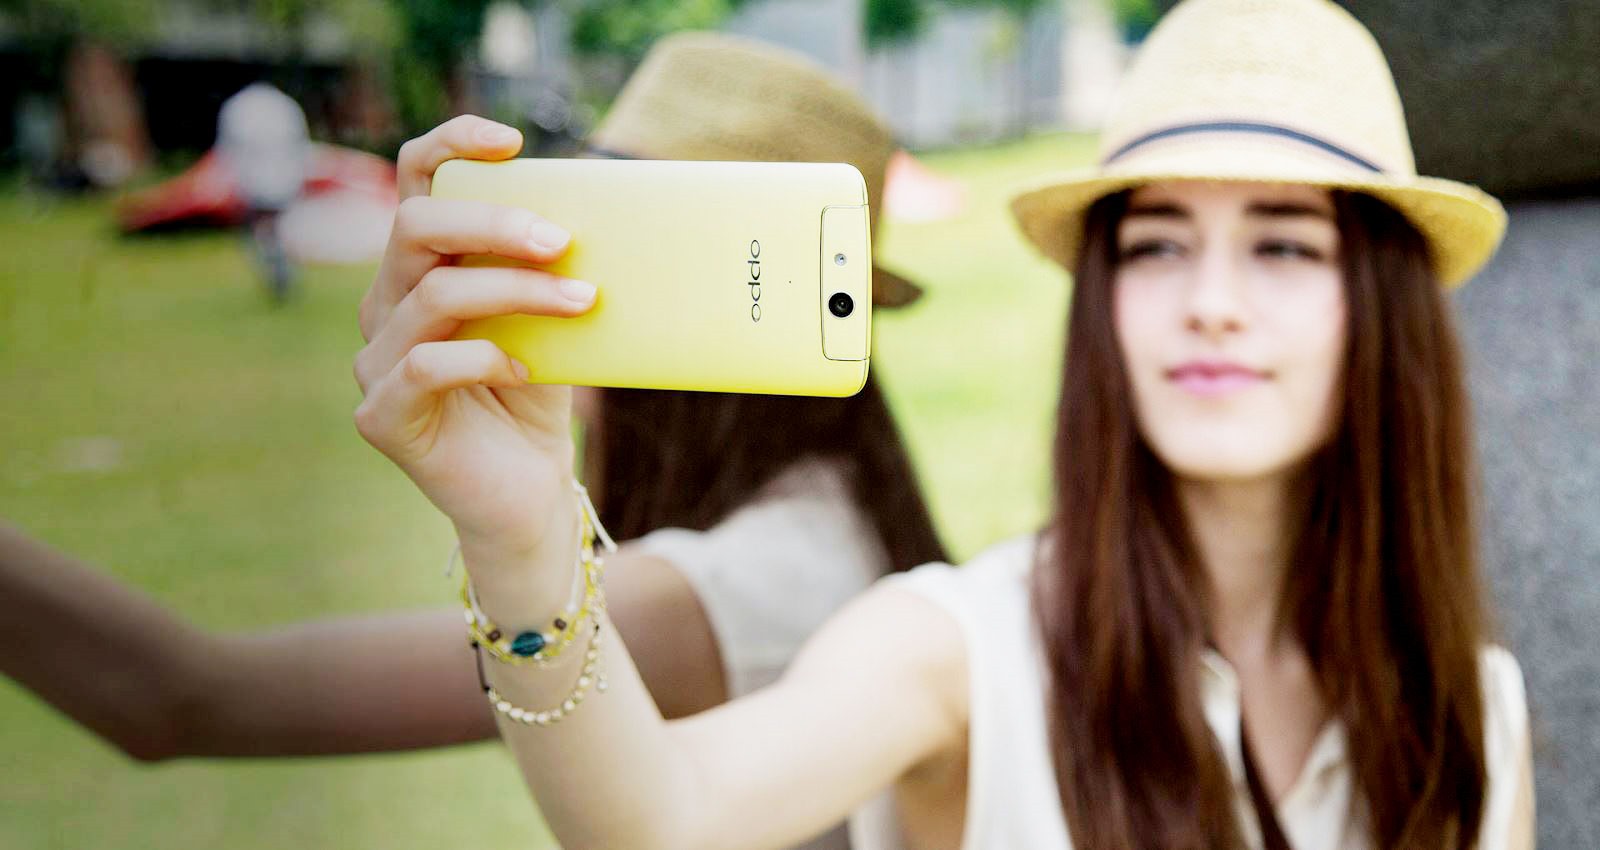 oppo n1 mini OPPO N1 Mini with Rotating Camera Design Launched in Pakistan